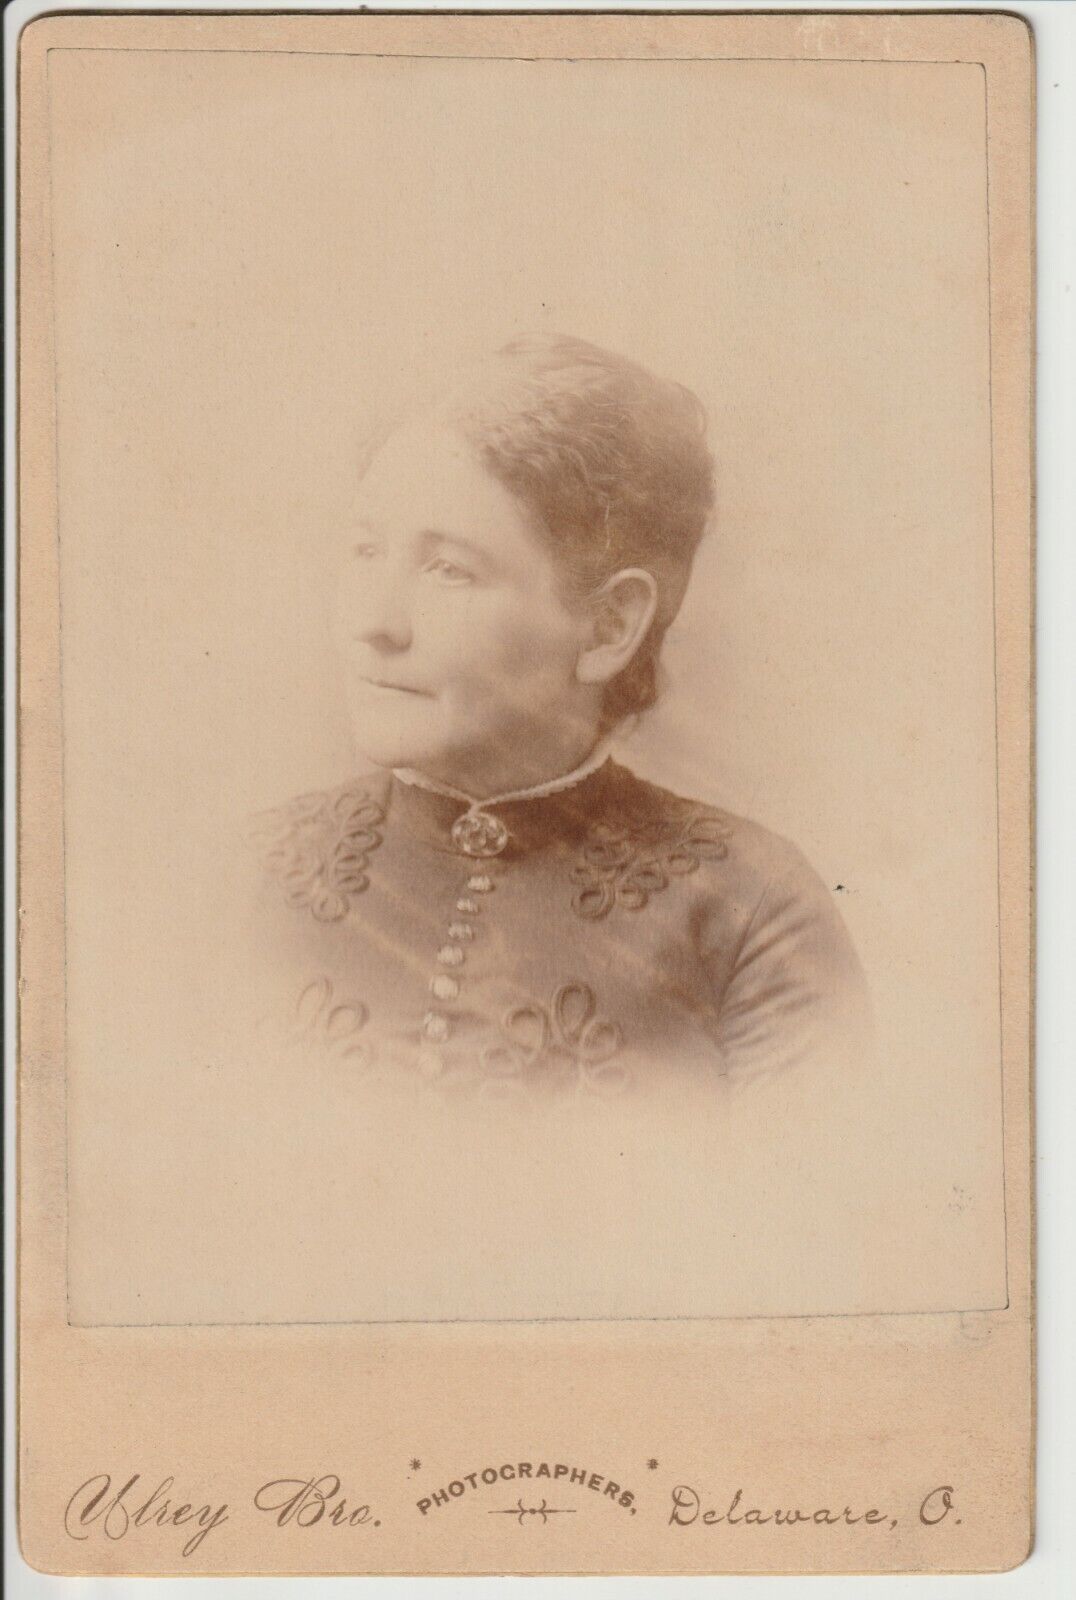 Delaware Ohio Cabinet Card Photo of Victorian Lady by Ulrey Bros 57 Sandusky Ave